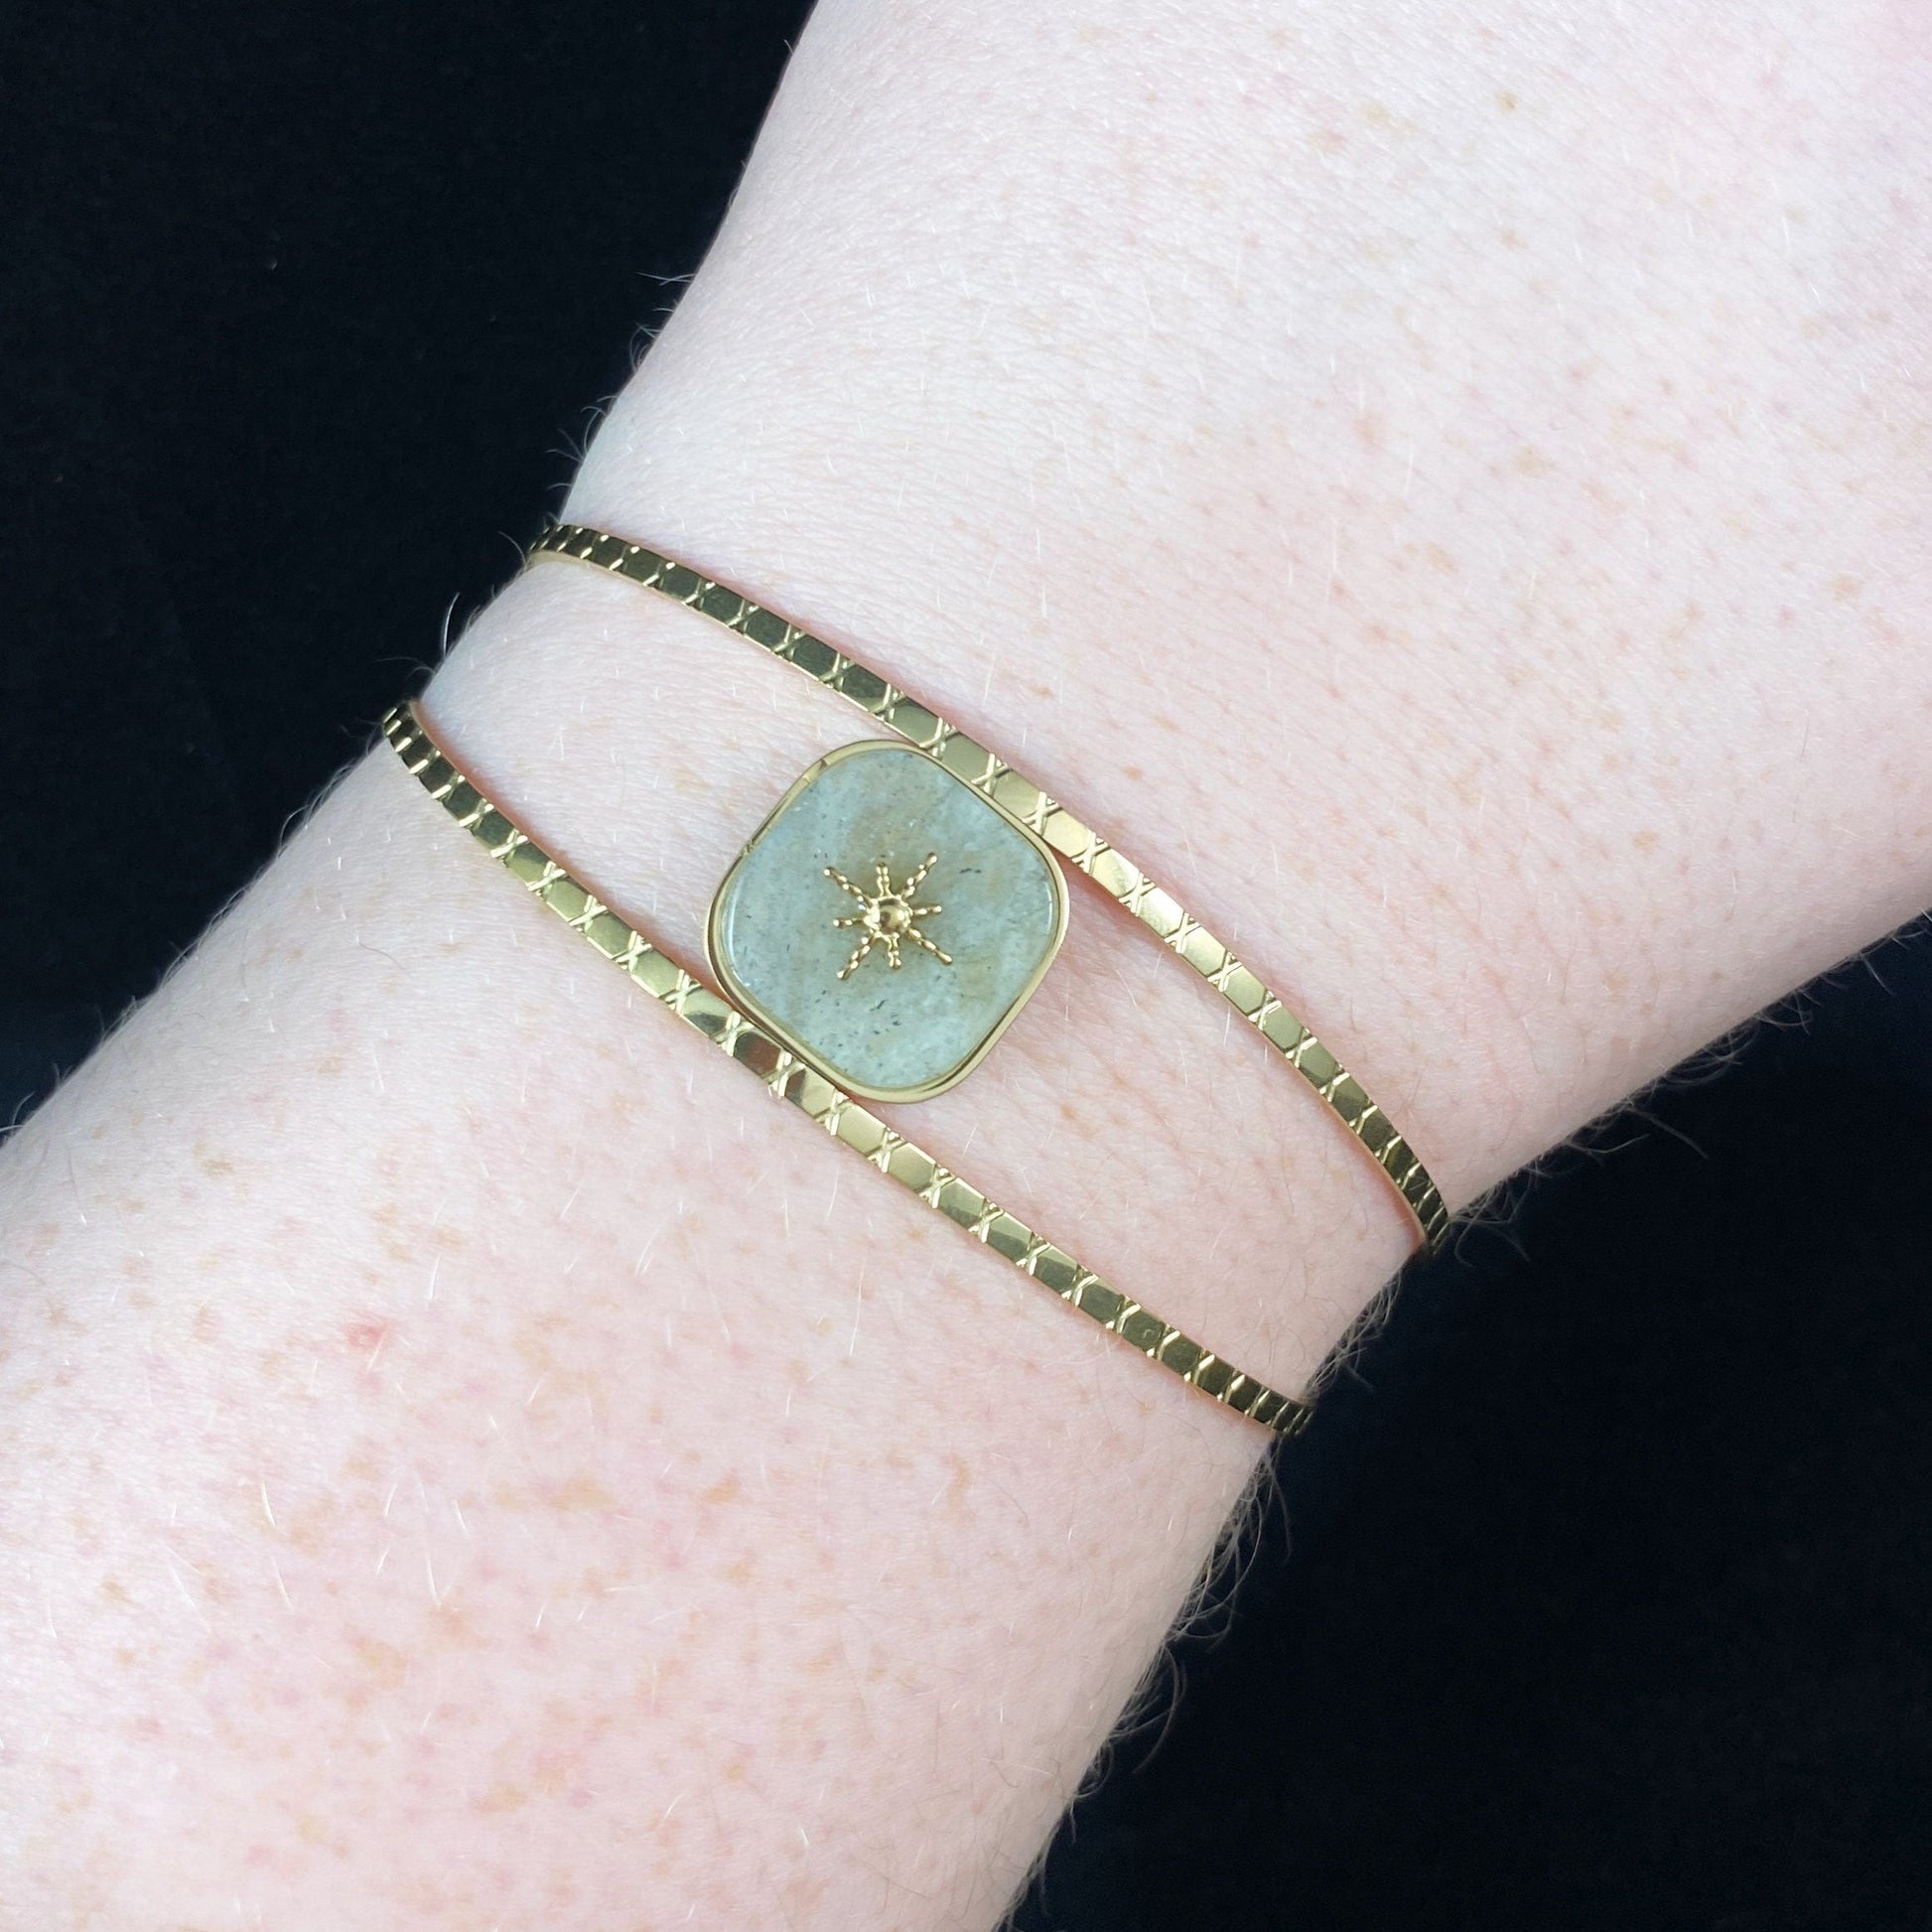 Pastel Green Natural Stone Double Cuff Bracelet with Intricate Gold Bands and Gold Starburst Accent